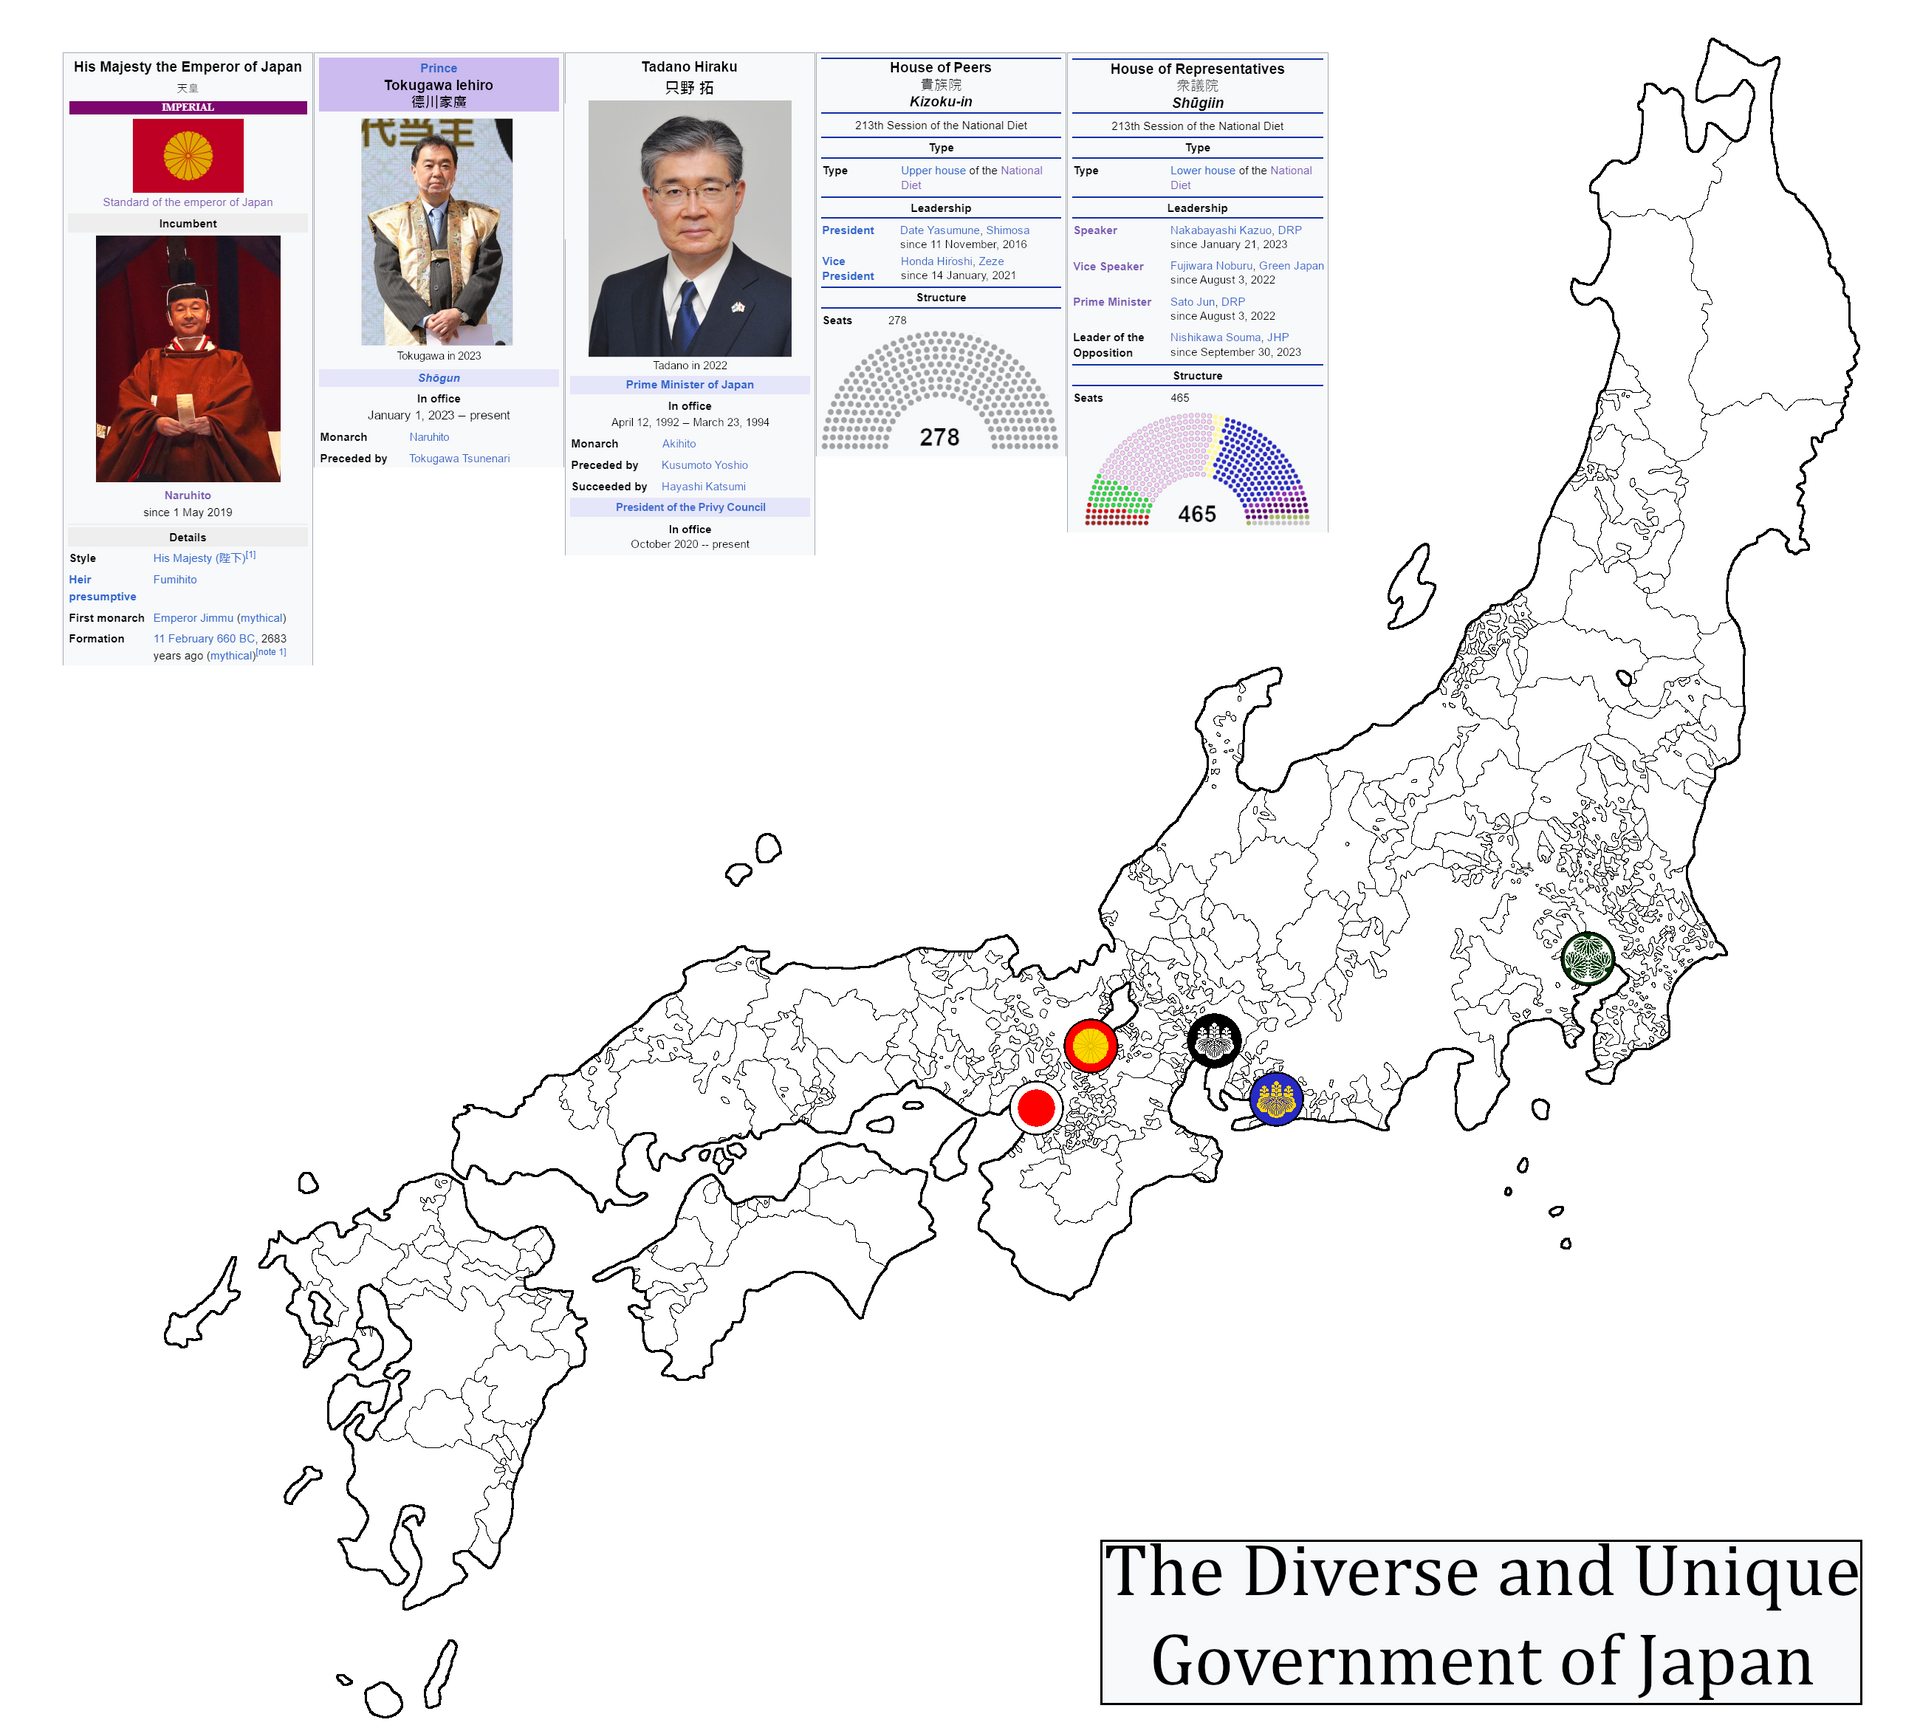 the_unique_government_of_japan_by_spiritswriter123_dhdi5fv-fullview.png